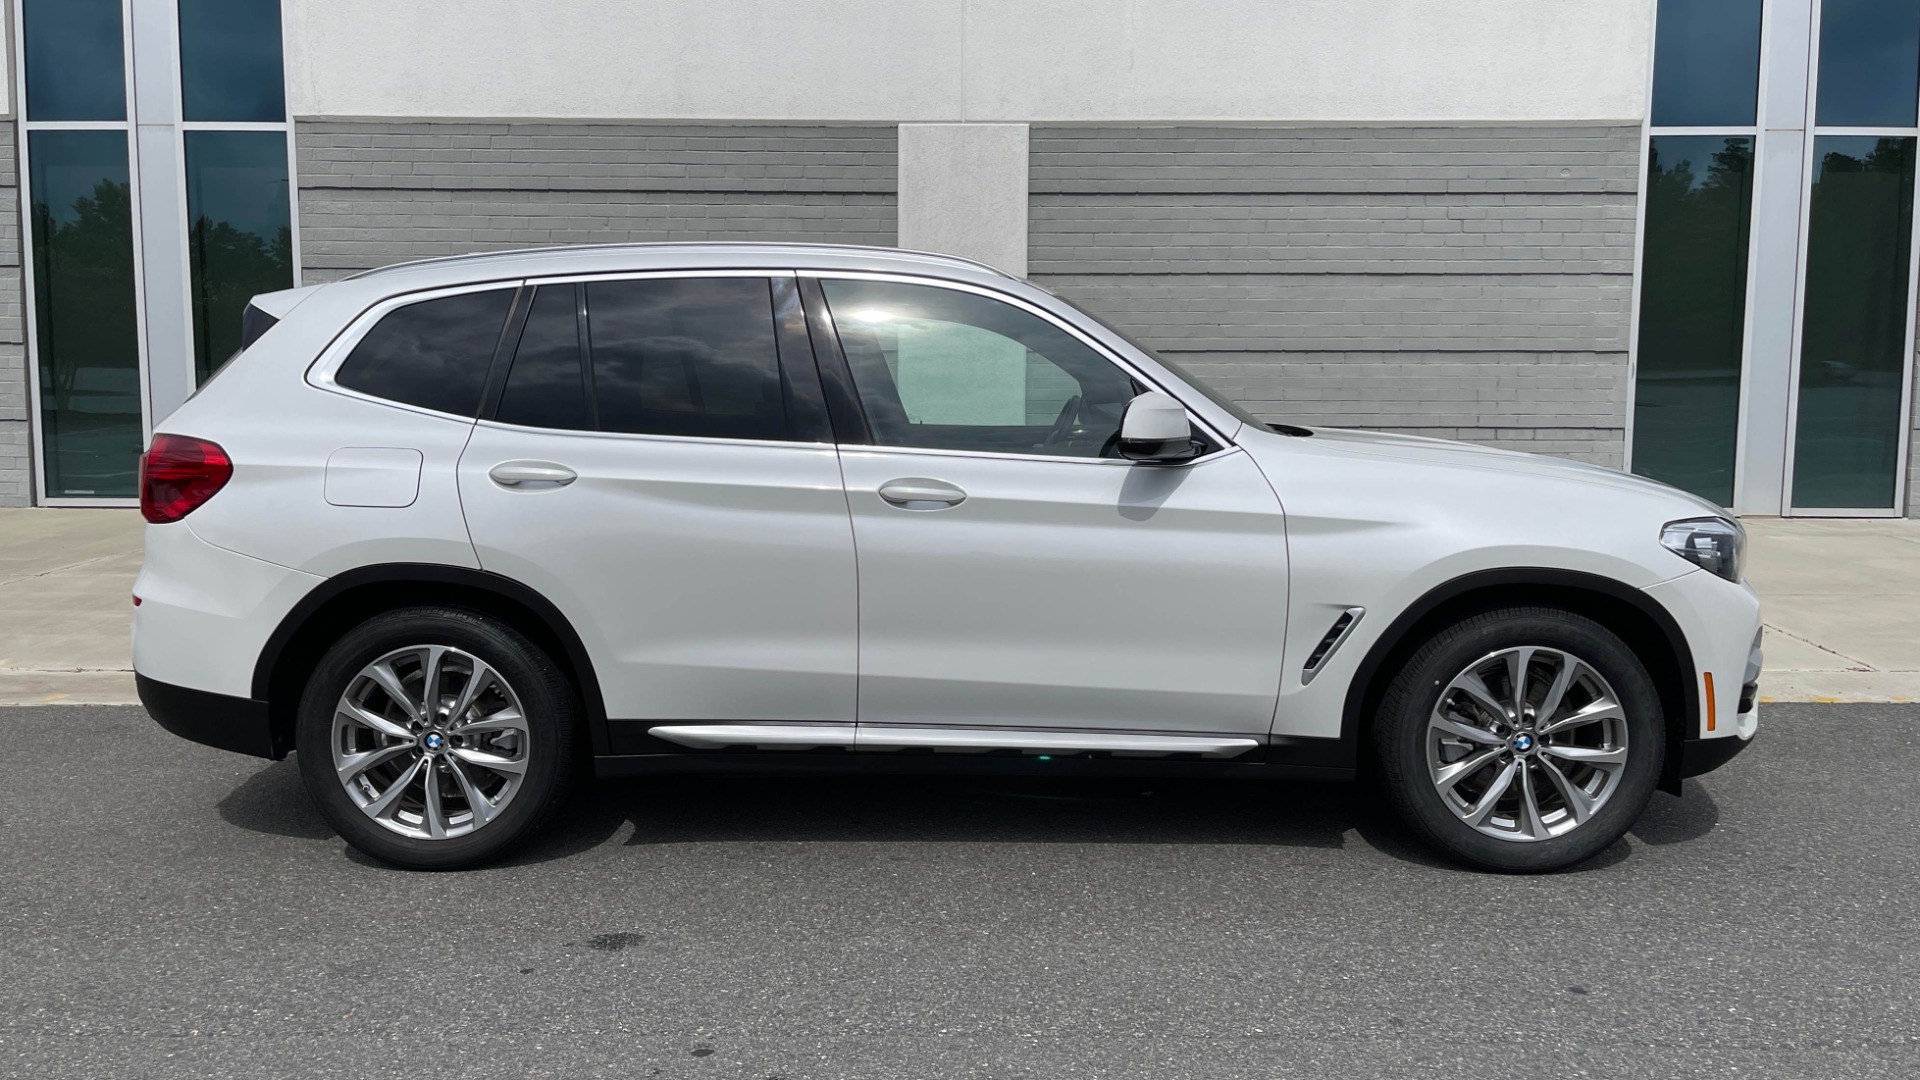 Used 2018 BMW X3 XDRIVE30I / NAV / PANO-ROOF / HTD STS / PARK DIST CNTRL / REARVIEW for sale Sold at Formula Imports in Charlotte NC 28227 6